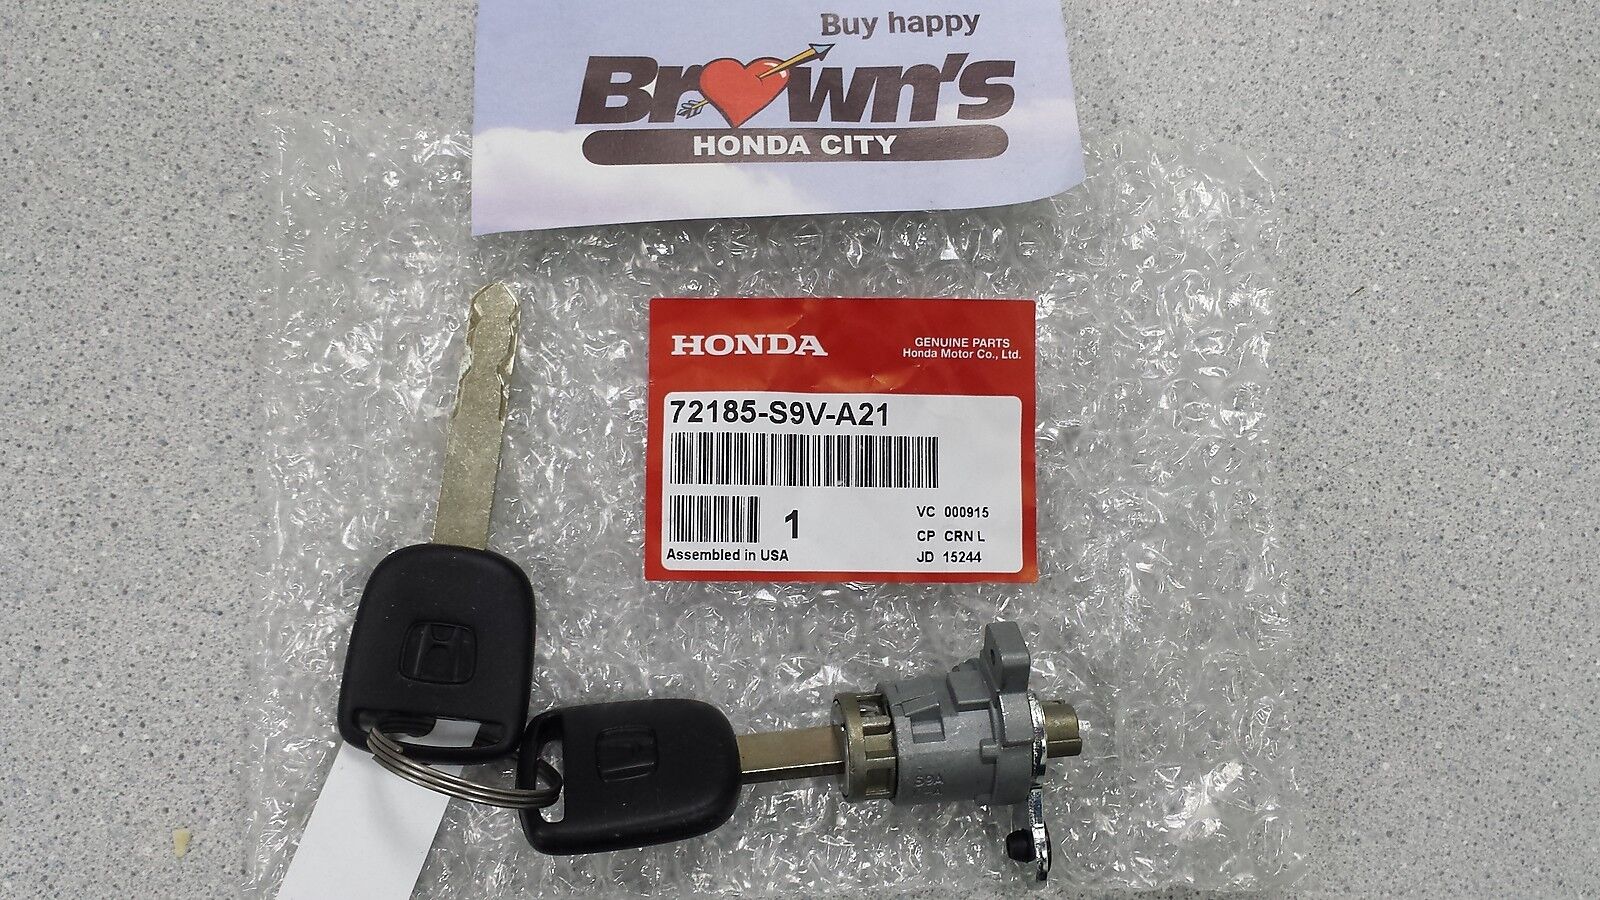 NEW GENUINE HONDA PILOT DRIVERS DOOR LOCK CYLINDER WITH KEY 72185-S9V-A21